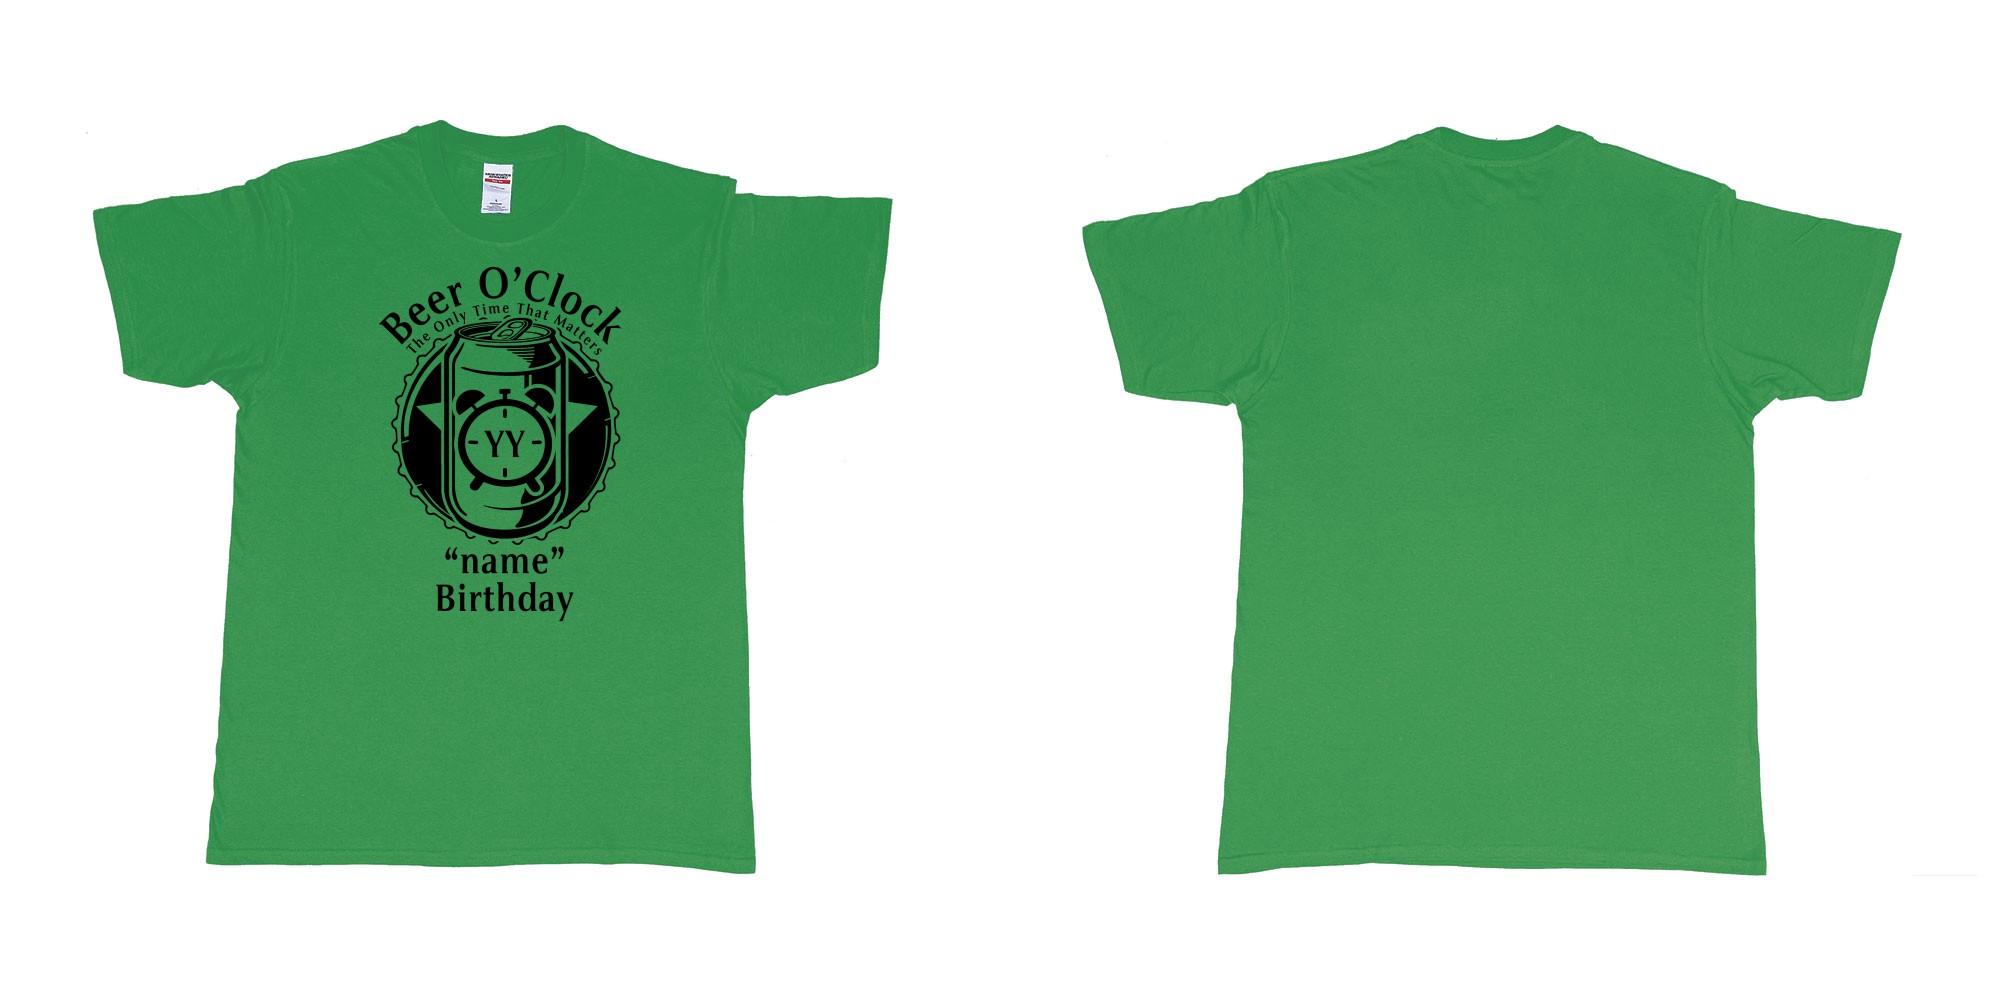 Custom tshirt design beer oclock the only time that matters custom year and names birthday bali in fabric color irish-green choice your own text made in Bali by The Pirate Way